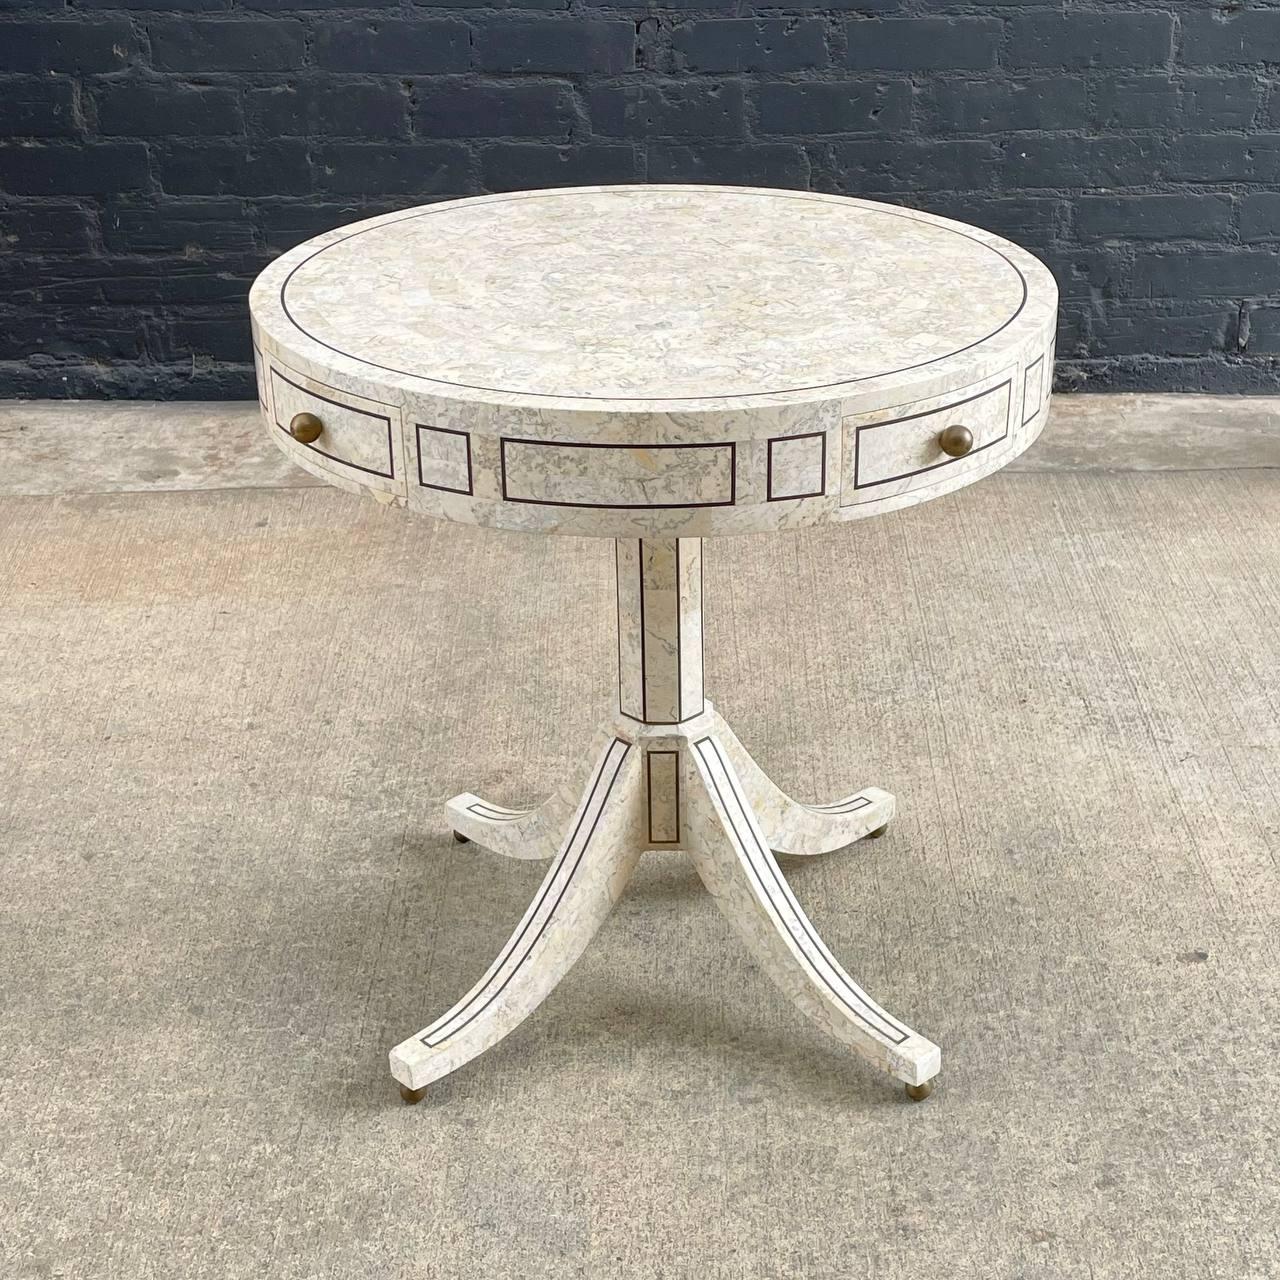 Neoclassical Vintage Tessellated Pedestal Drum Table by Maitland Smith For Sale